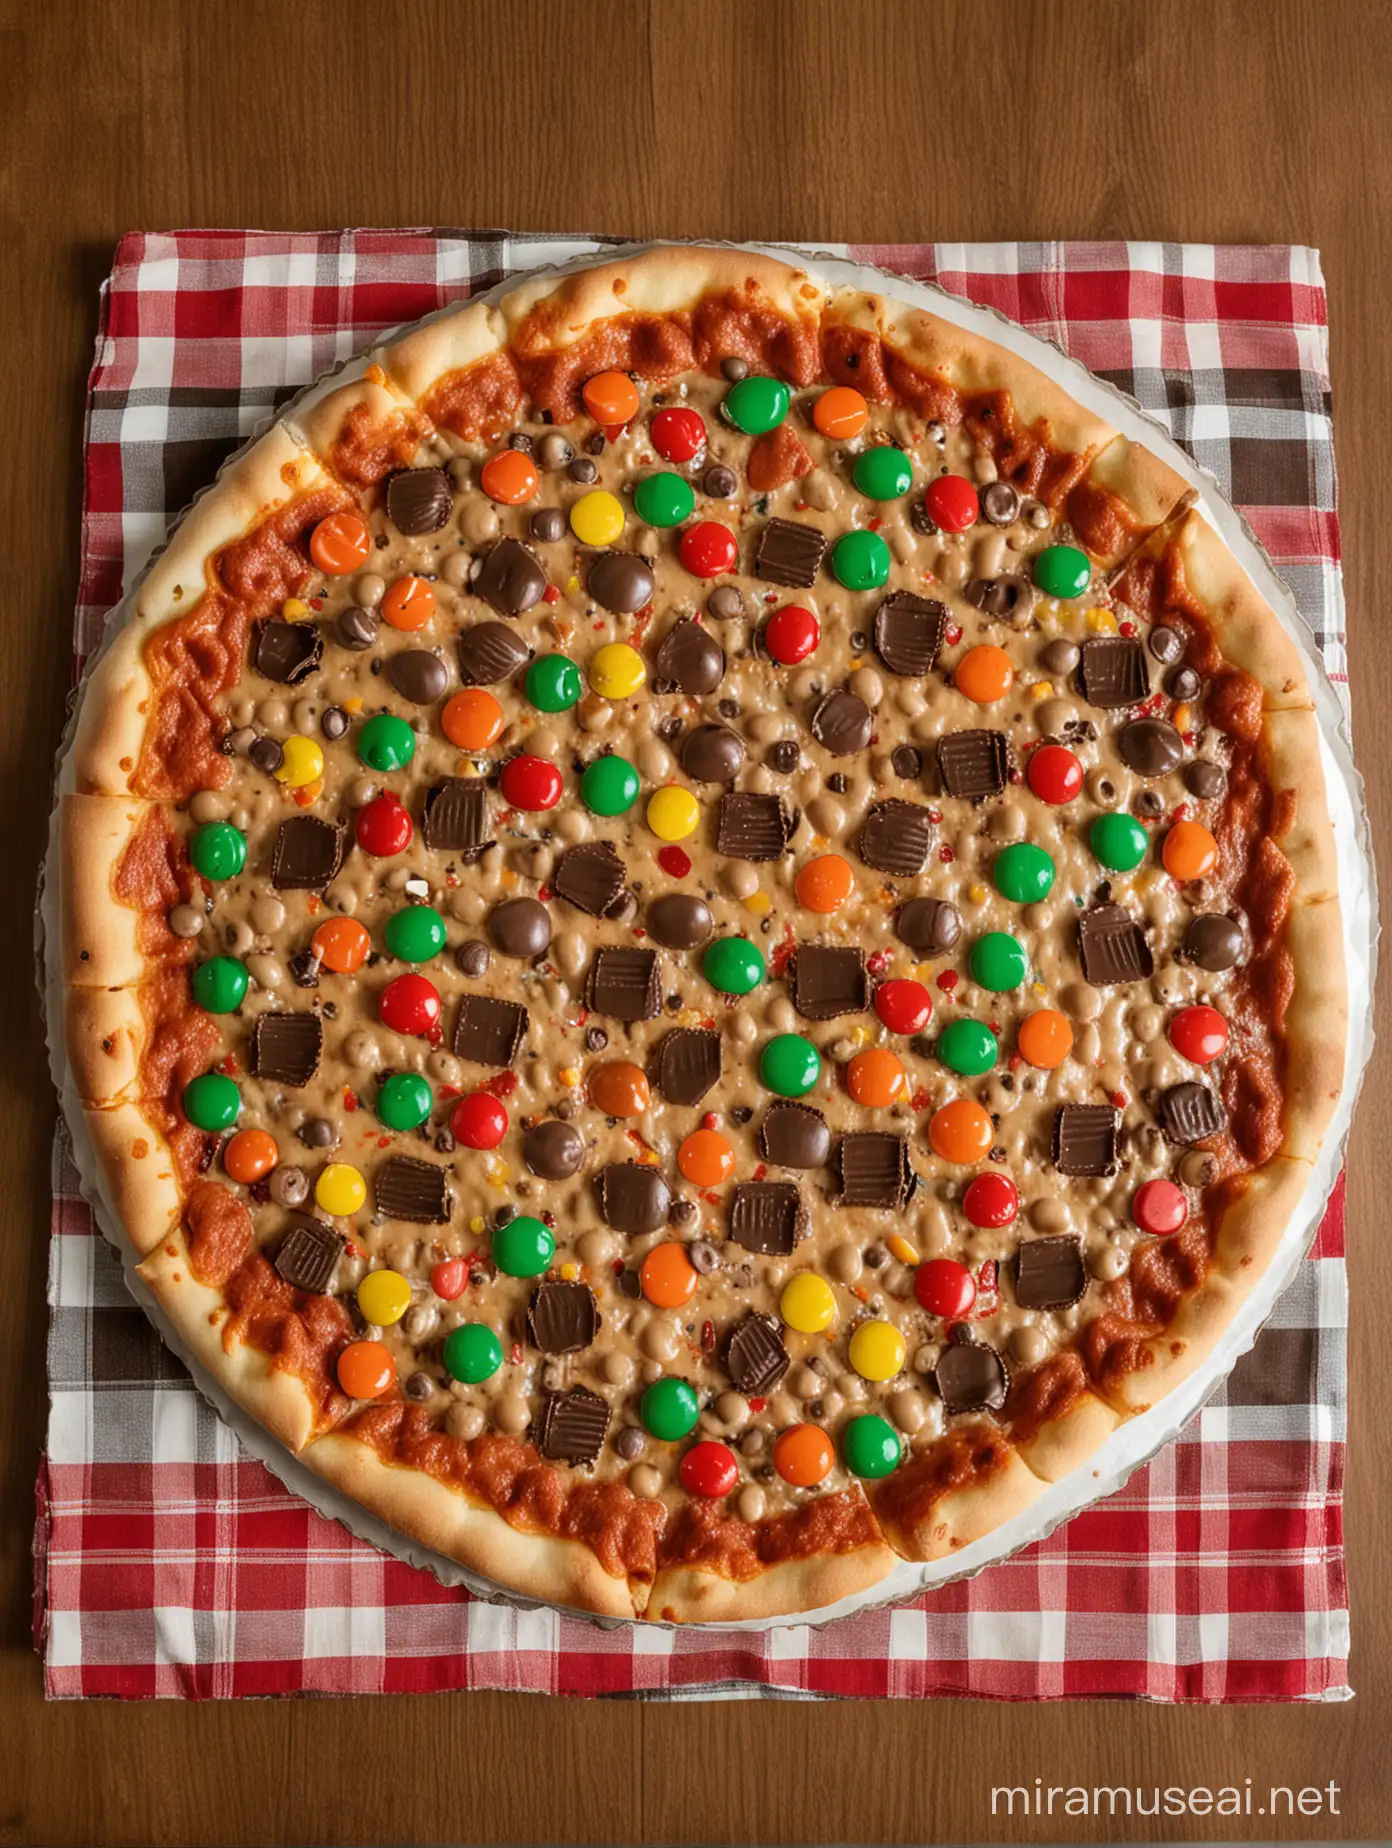 A delicious looking pizza with M&M’s and Reese’s Peanut Butter cups on it. It is laid upon a table with a checkered tablecloth. 